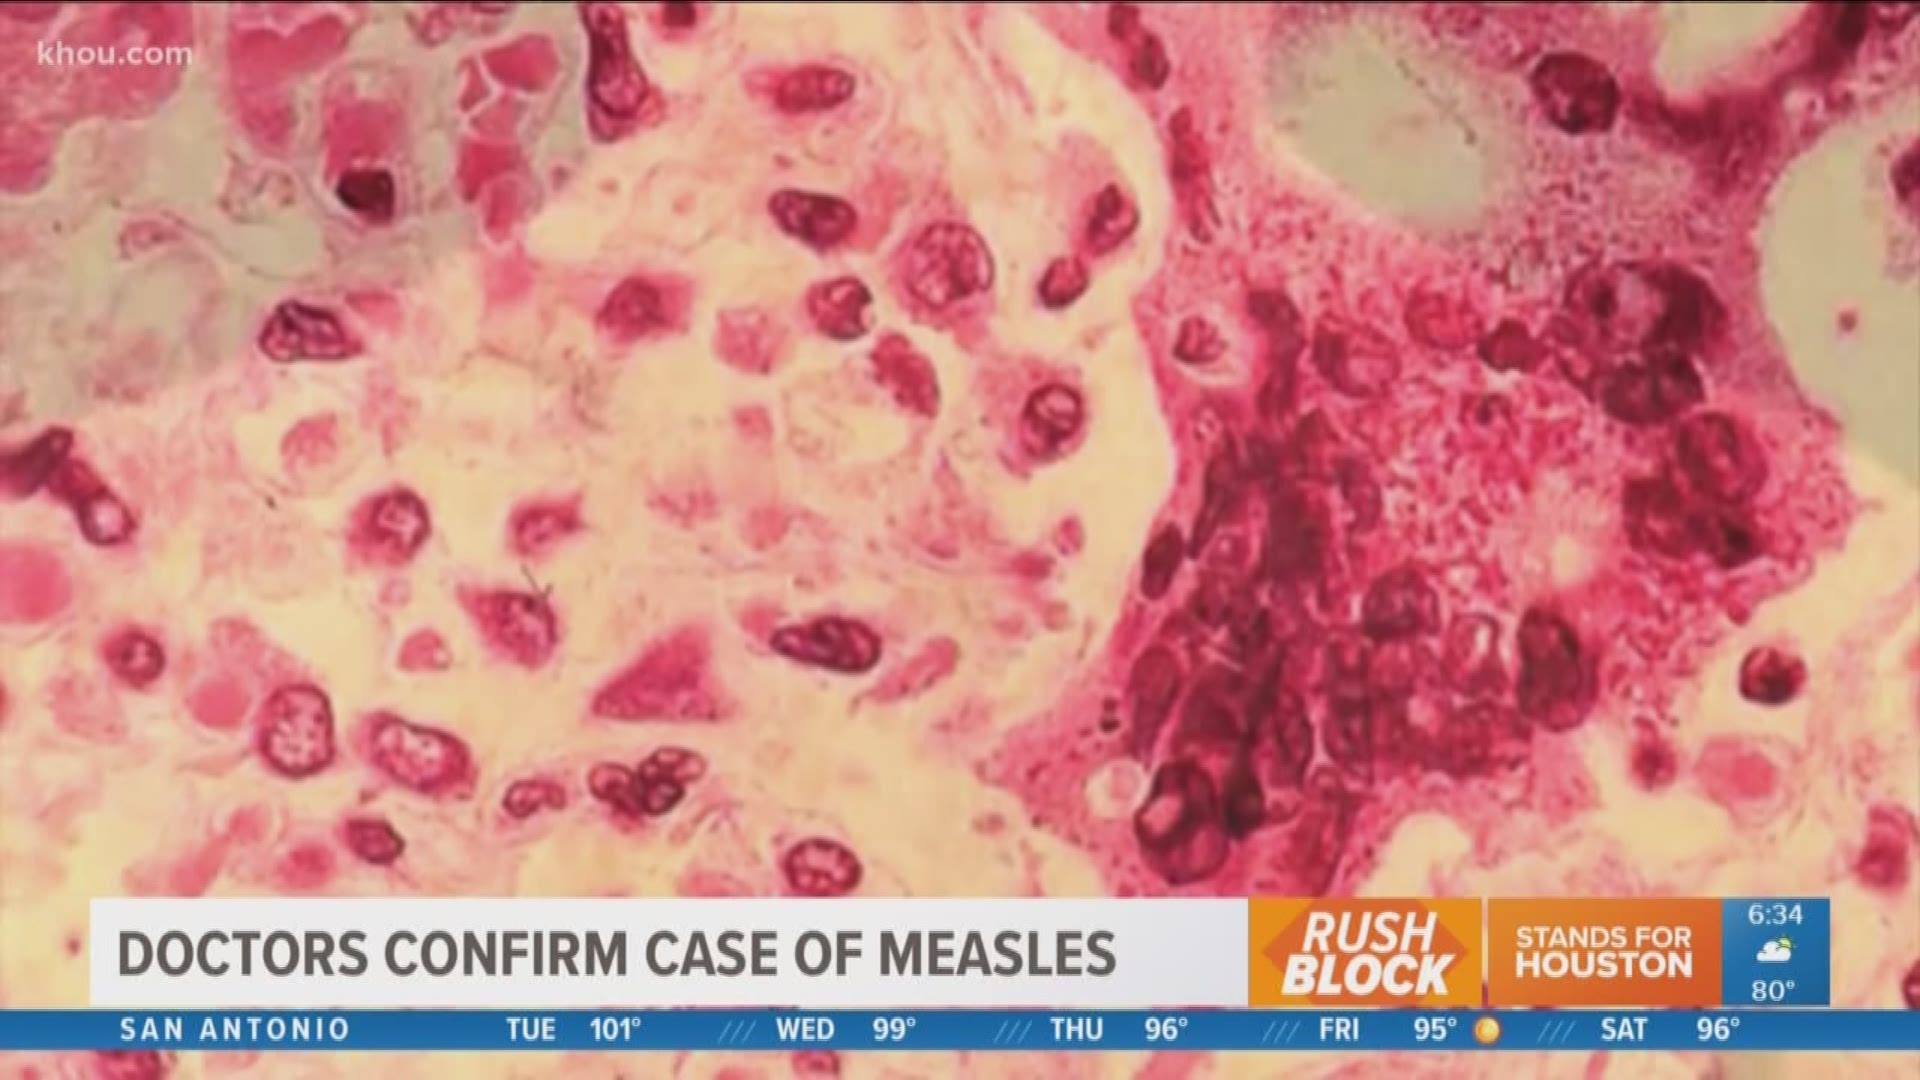 A child hospitalized with a severe fever has tested positive for the measles virus.